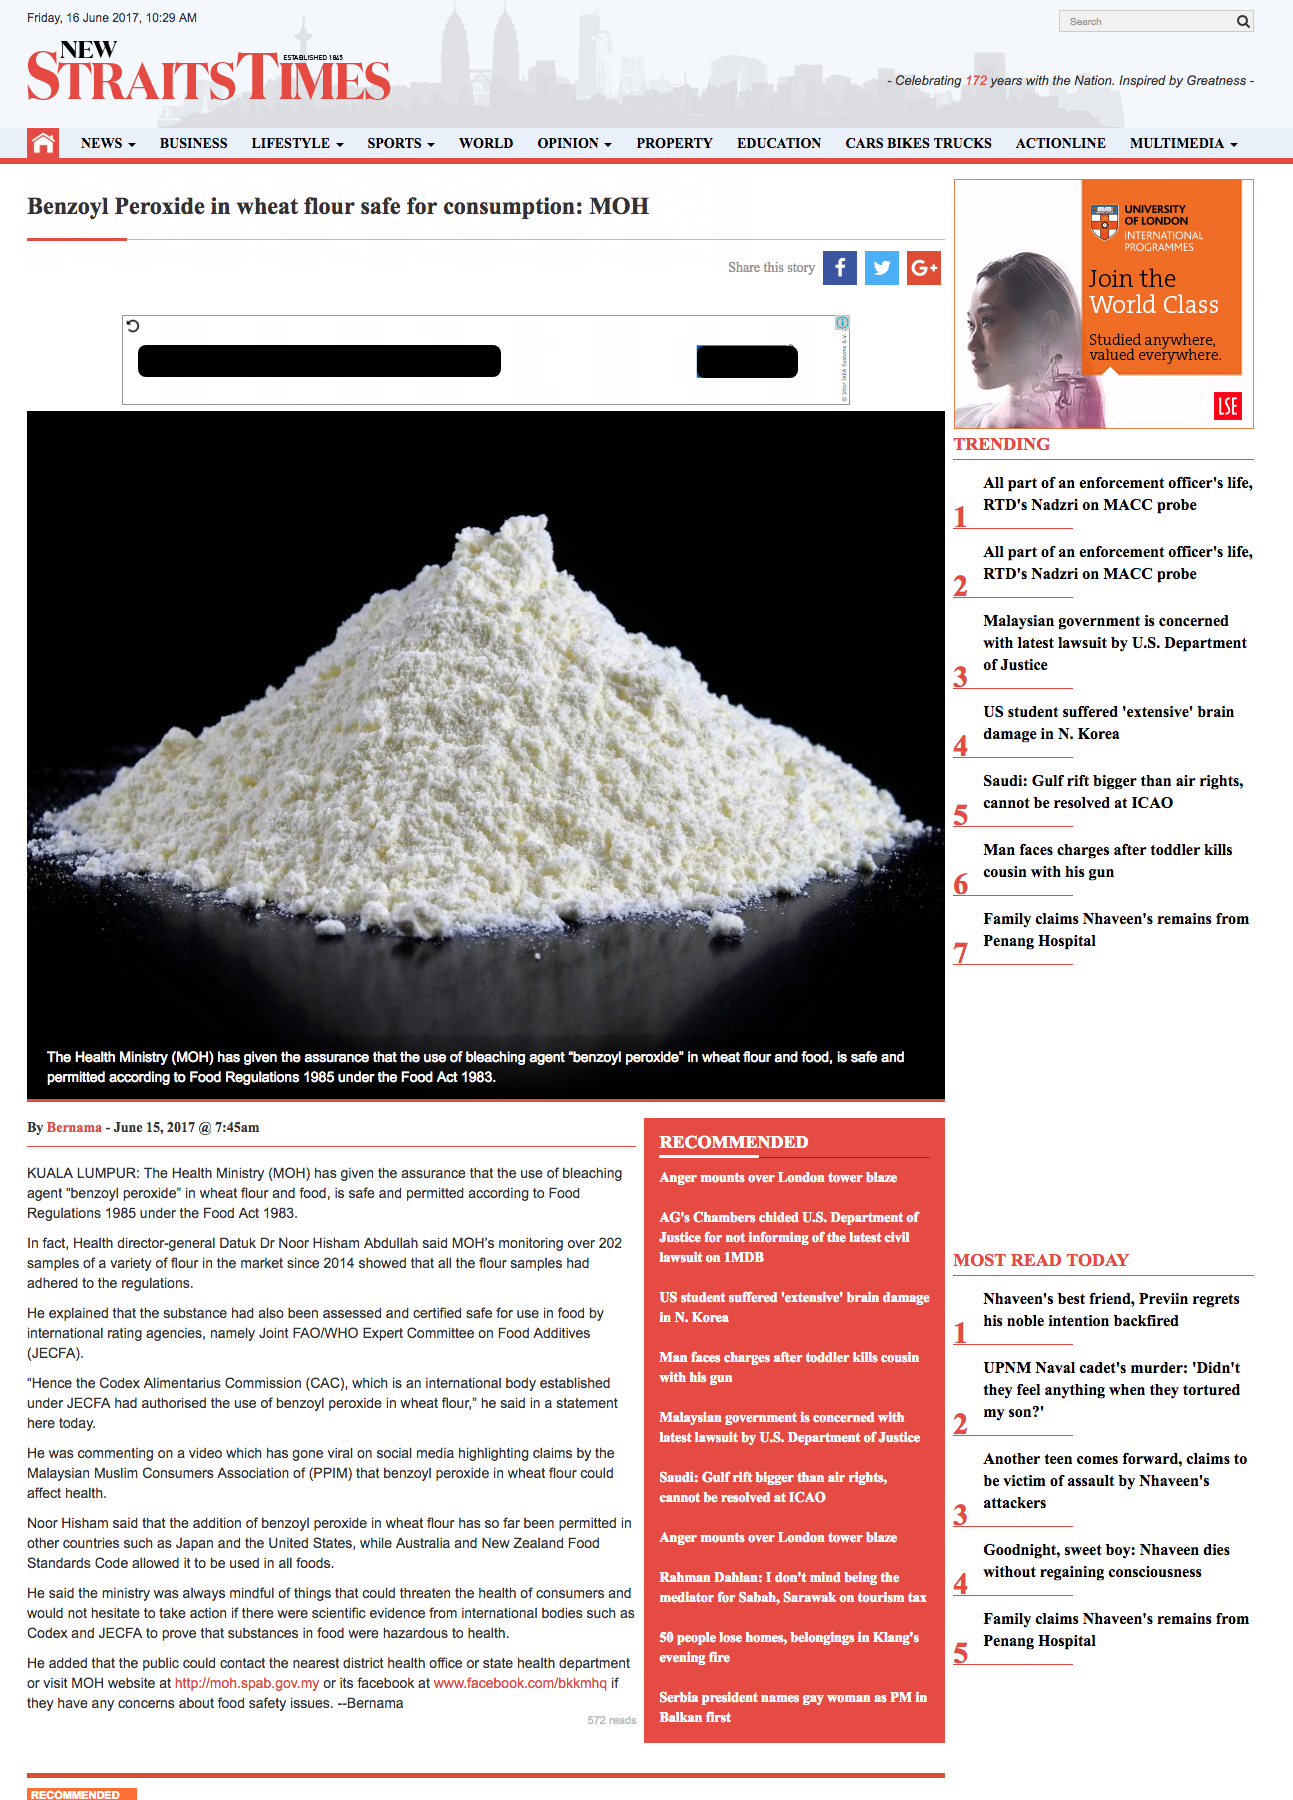 Benzoyl Peroxide in wheat flour safe for consumption  MOH   New Straits Times   Malaysia General Business Sports and Lifestyle News